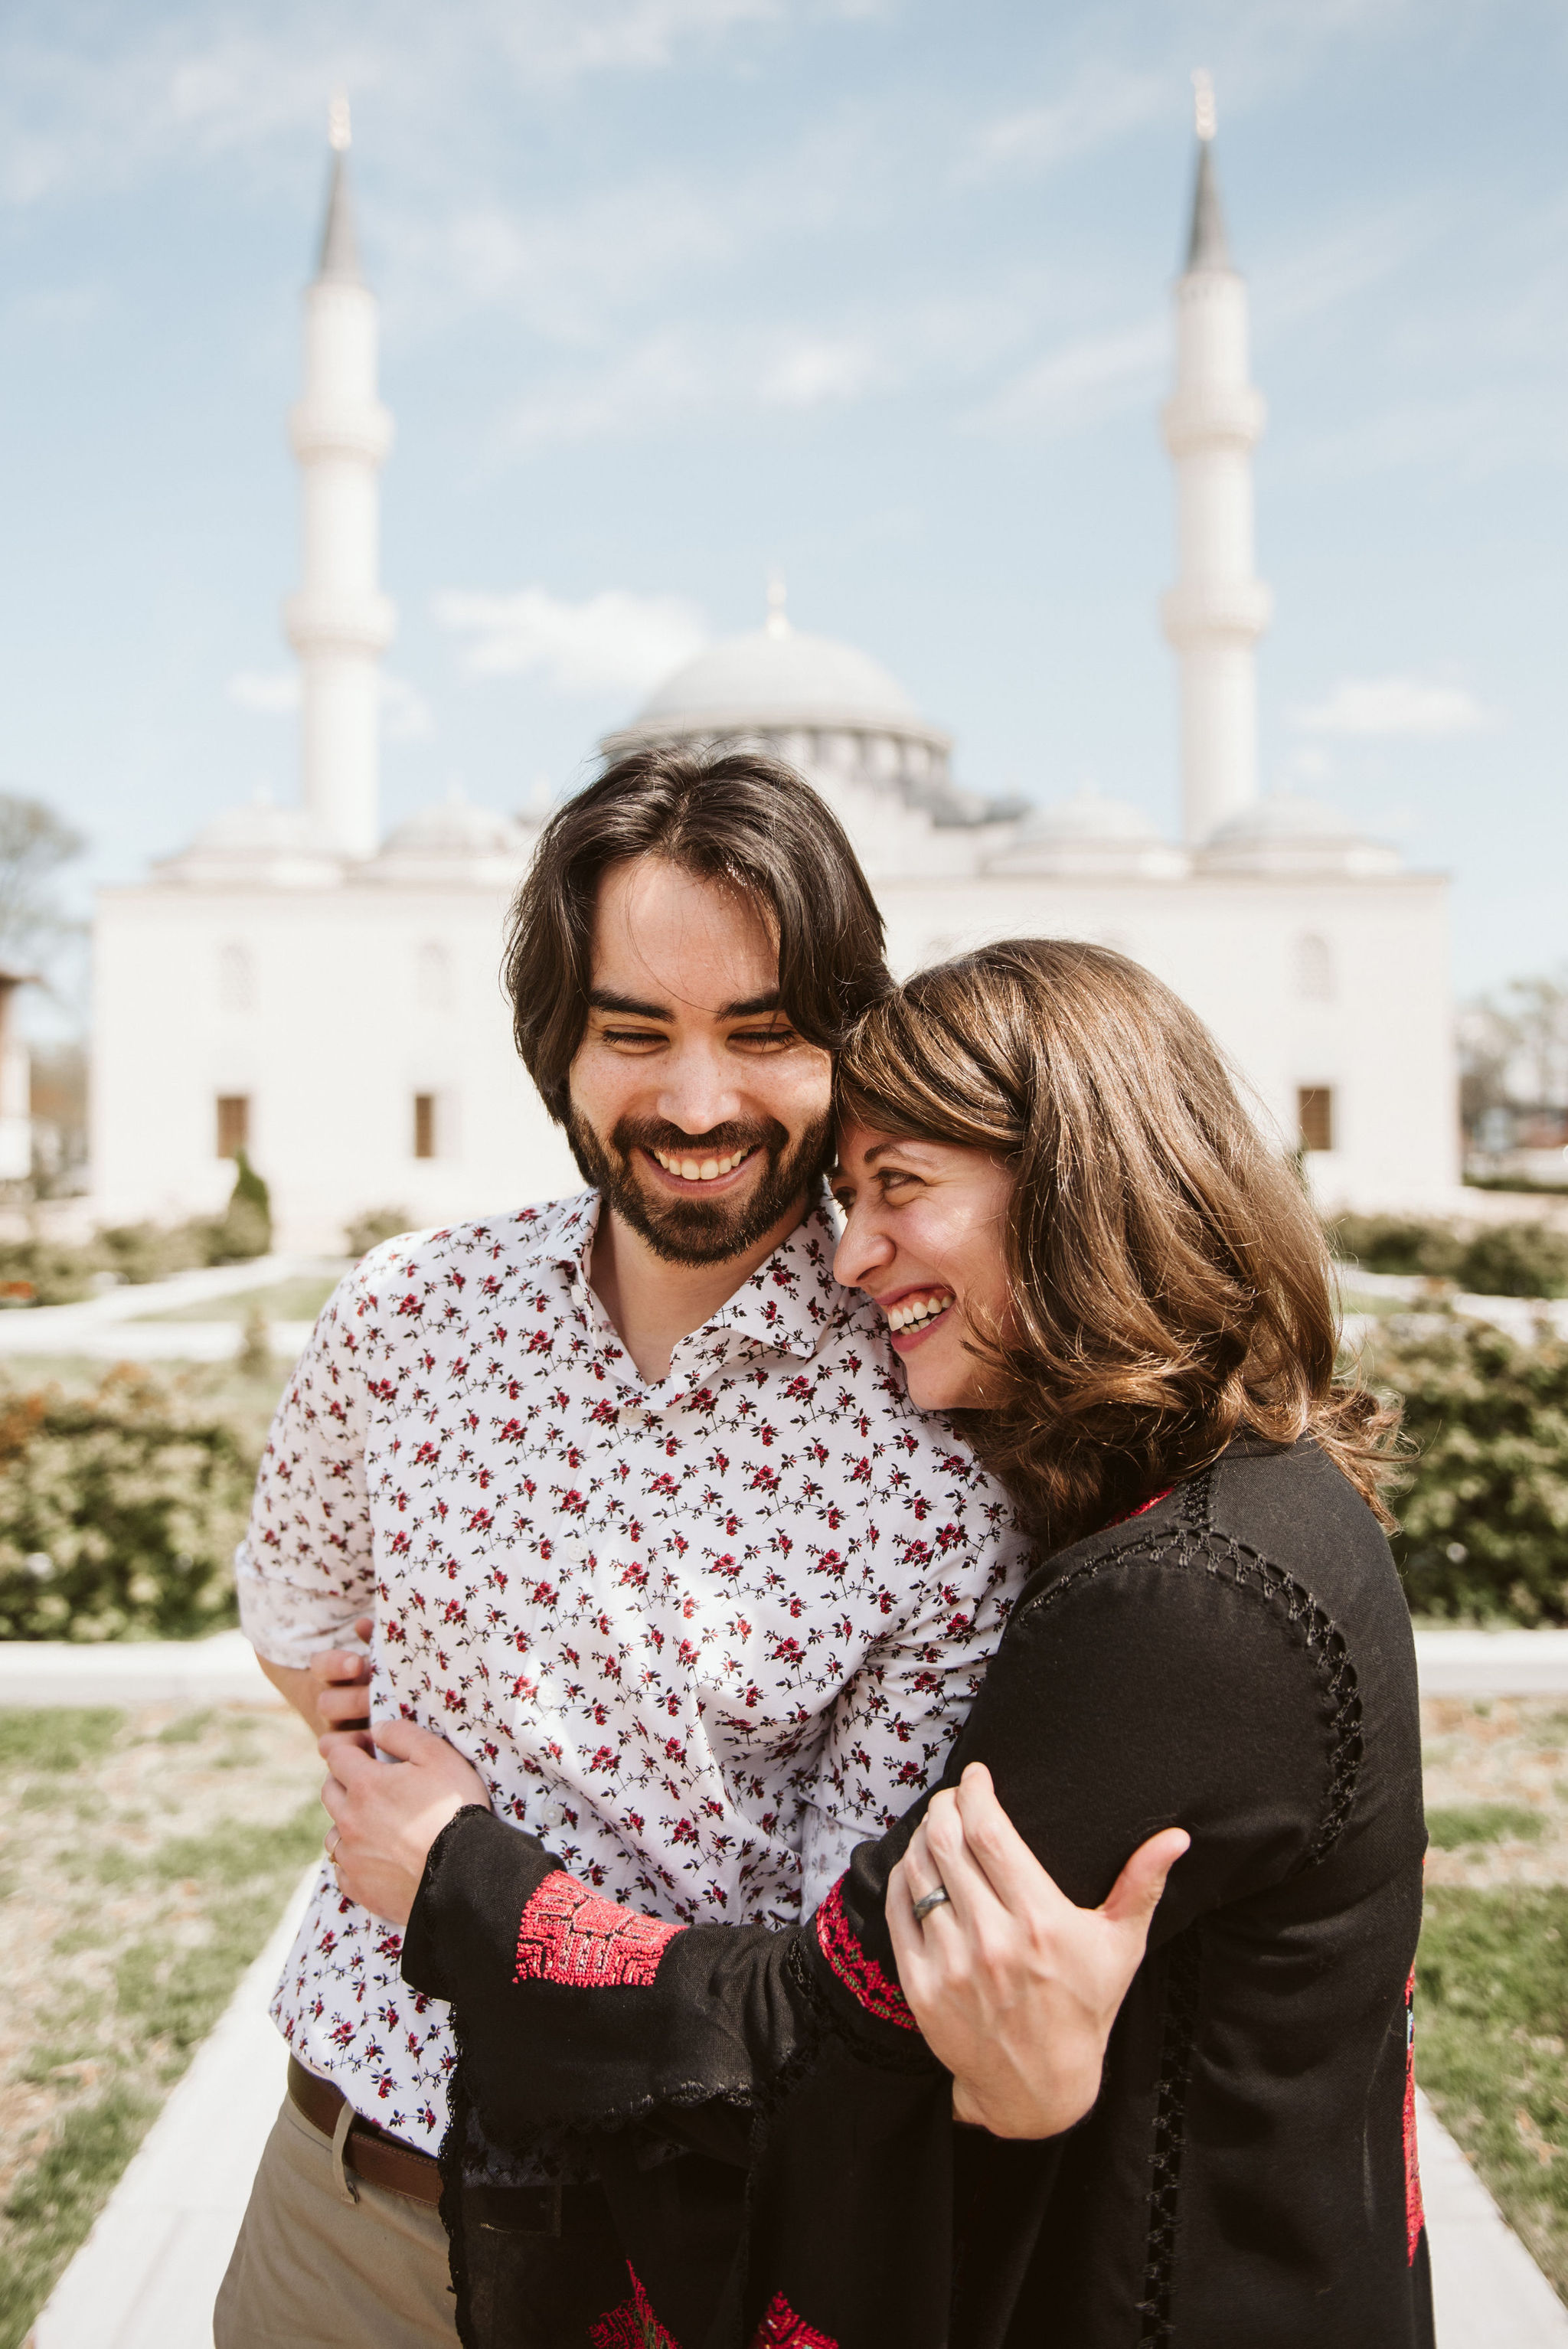  Washington DC, Baltimore Wedding Photographer, Diyanet Center of America, Spring, Intimate Wedding, Traditional, Classic, Palestinian, Turkish Design, Bride and groom Laughing Together After Ceremony, Just Married 